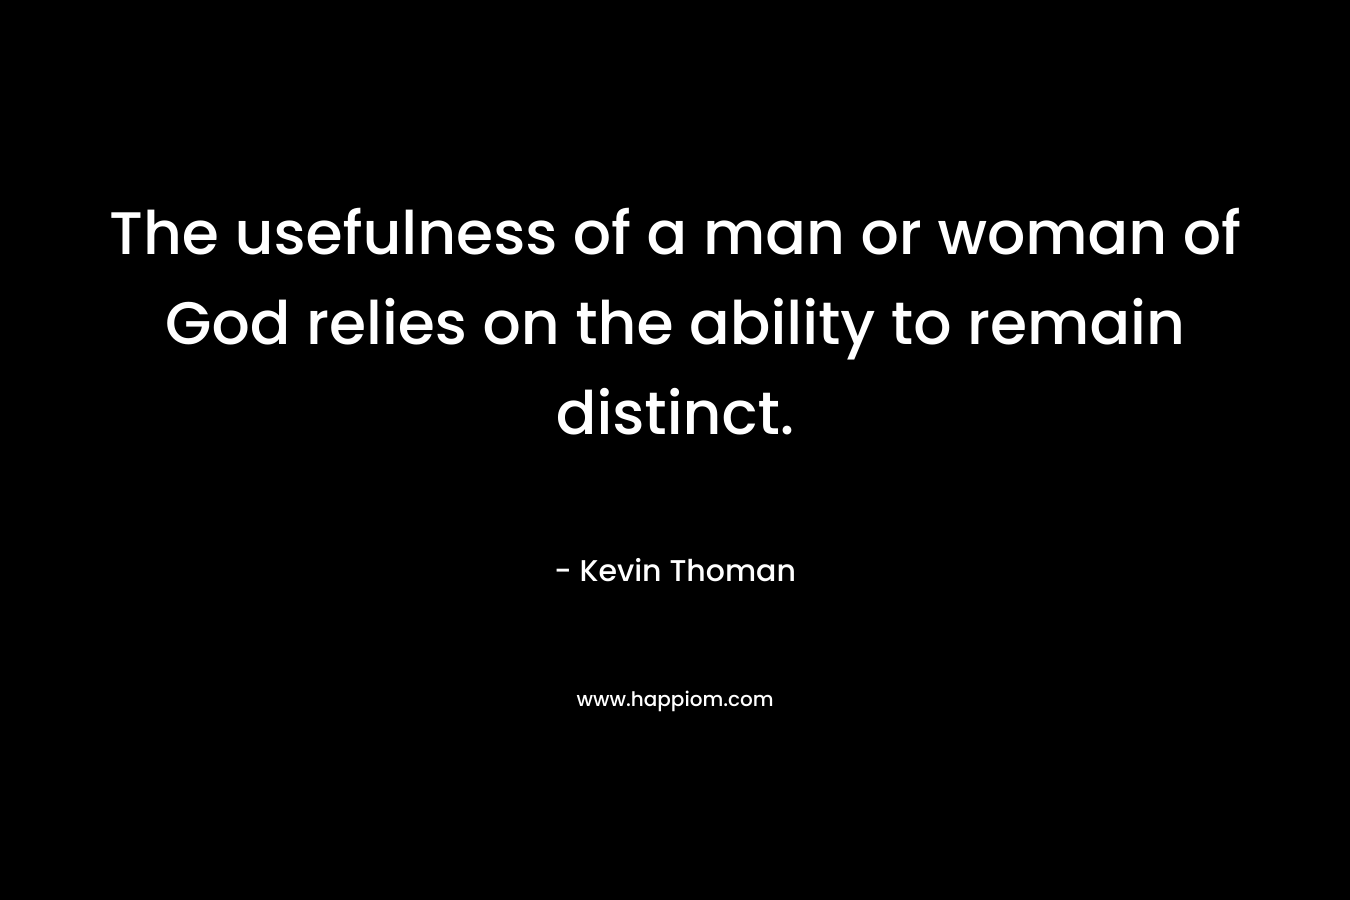 The usefulness of a man or woman of God relies on the ability to remain distinct. – Kevin Thoman